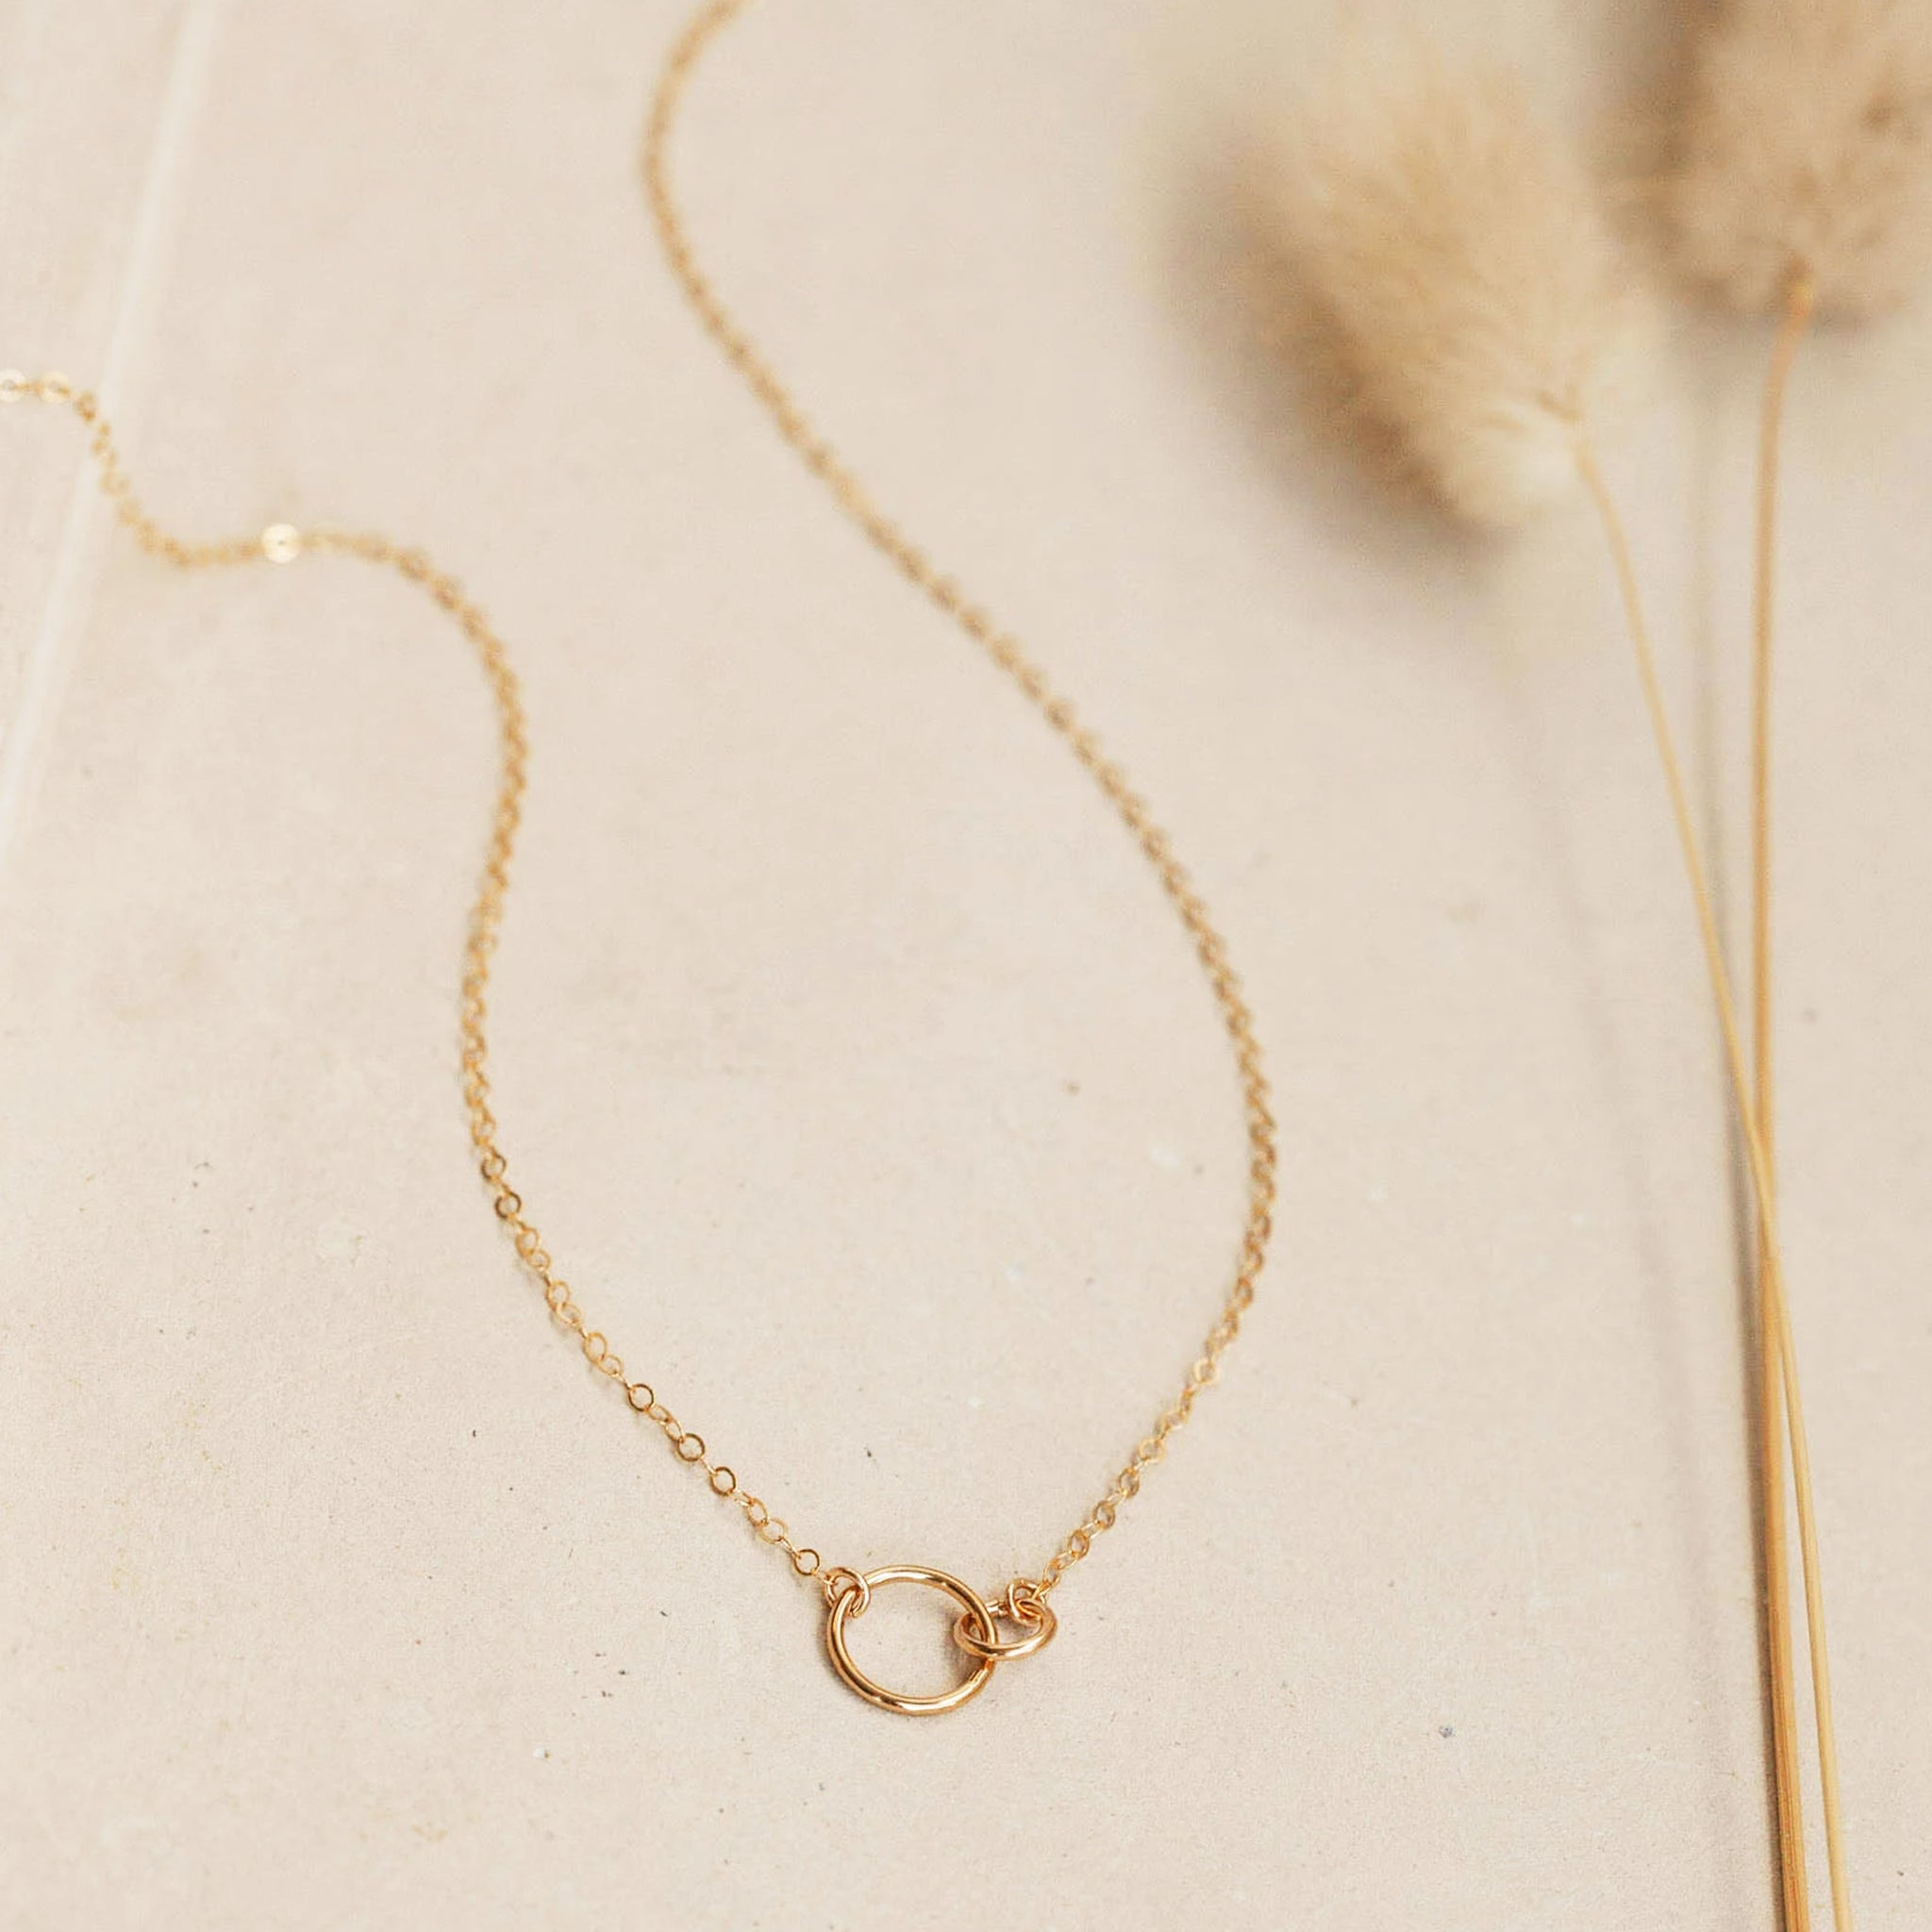 A dainty gold chain necklace with two different sized circle links connecting in the center. 